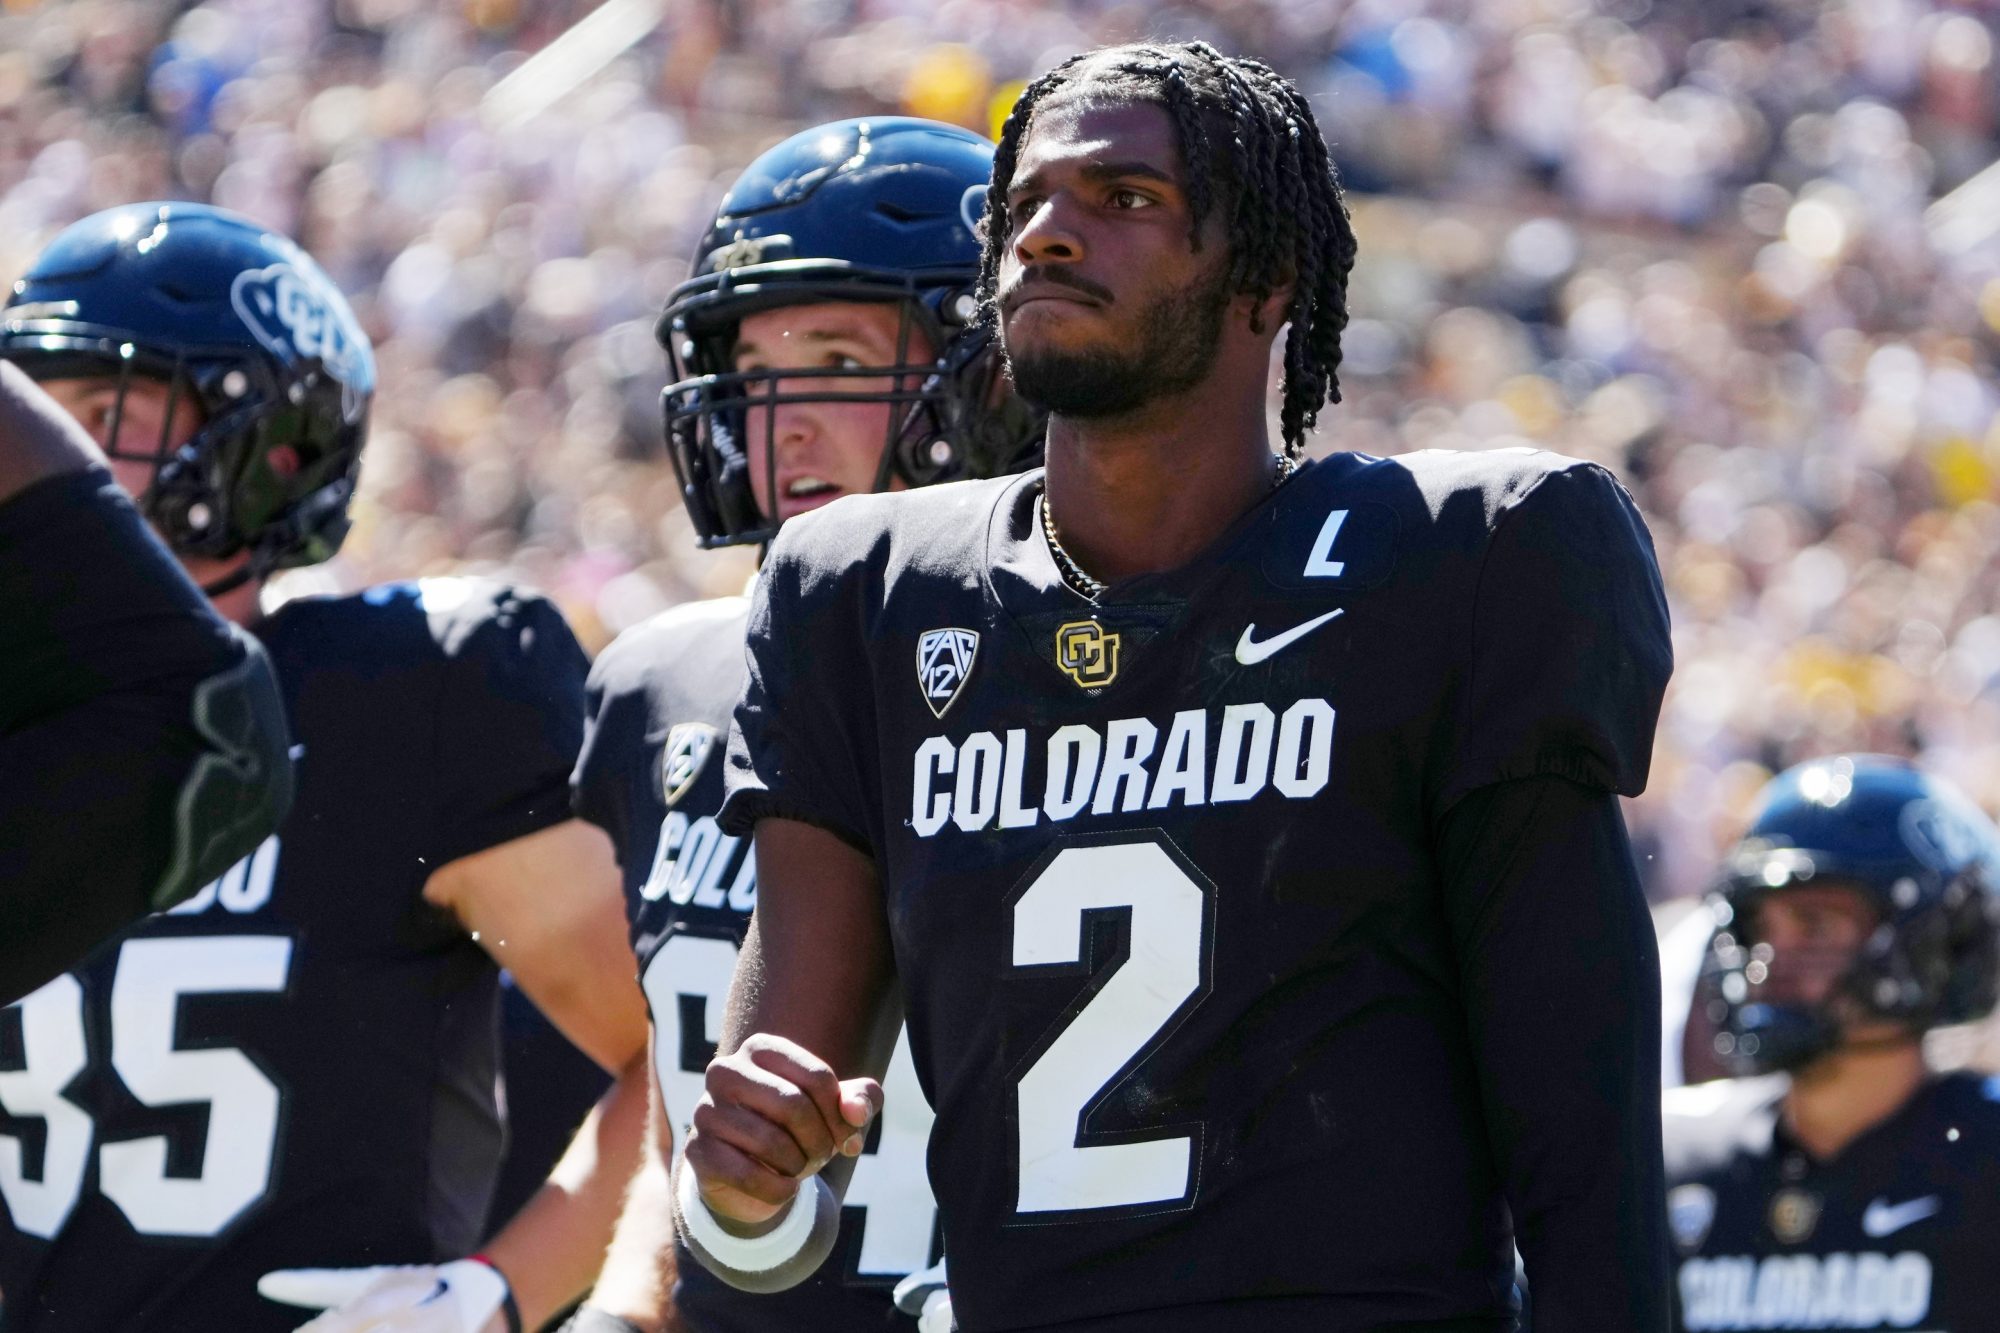 Colorado has passed Ohio State for college football's priciest ticket.